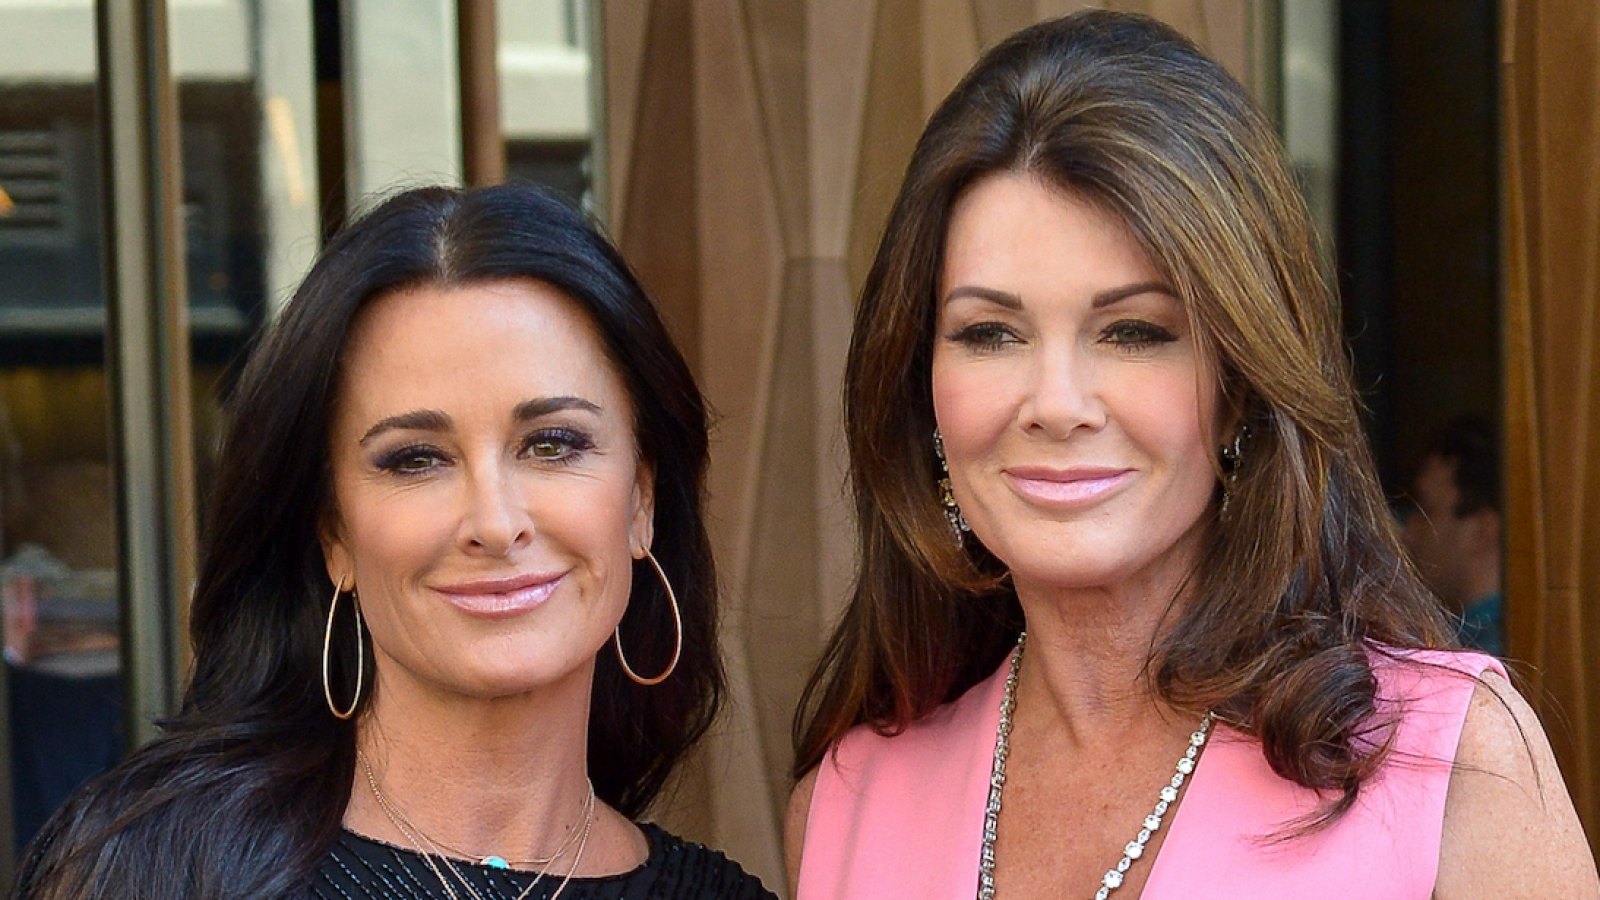 Lisa Vanderpump Says Her Friendship With Kyle Richards Is ‘Finished’